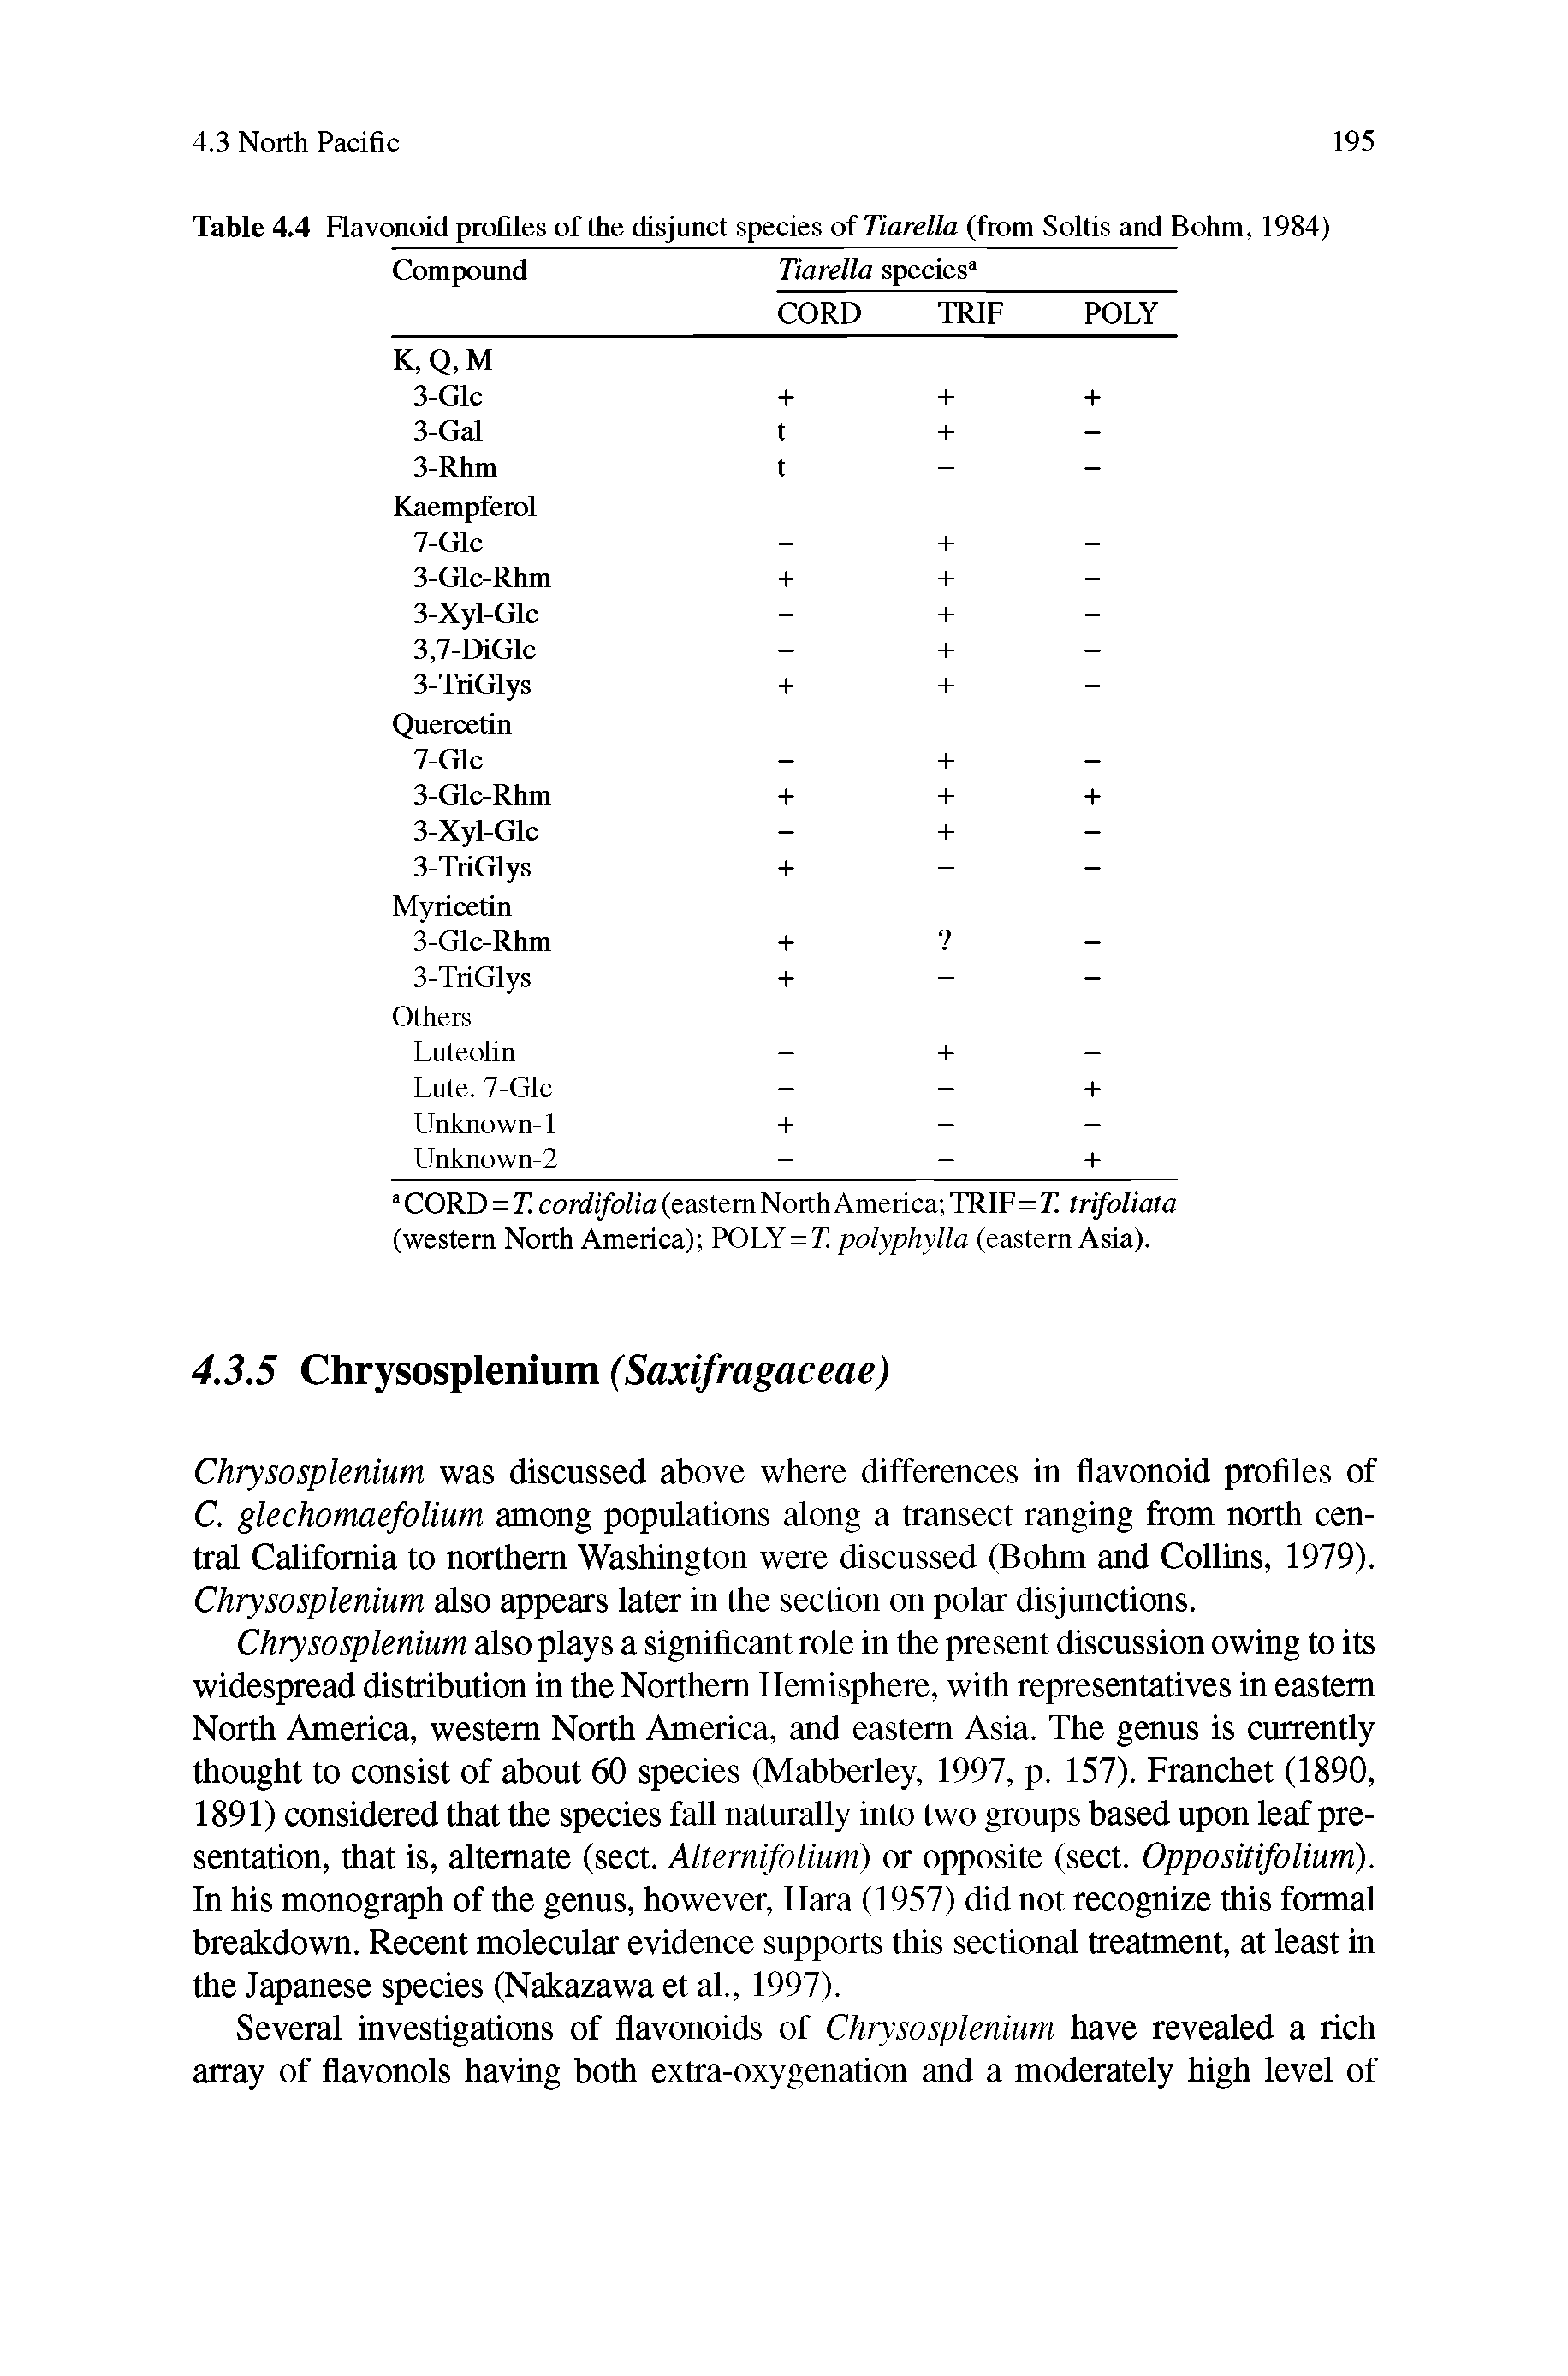 Table 4.4 Flavonoid profiles of the disjunct species of Tiarella (from Soltis and Bohm, 1984)...